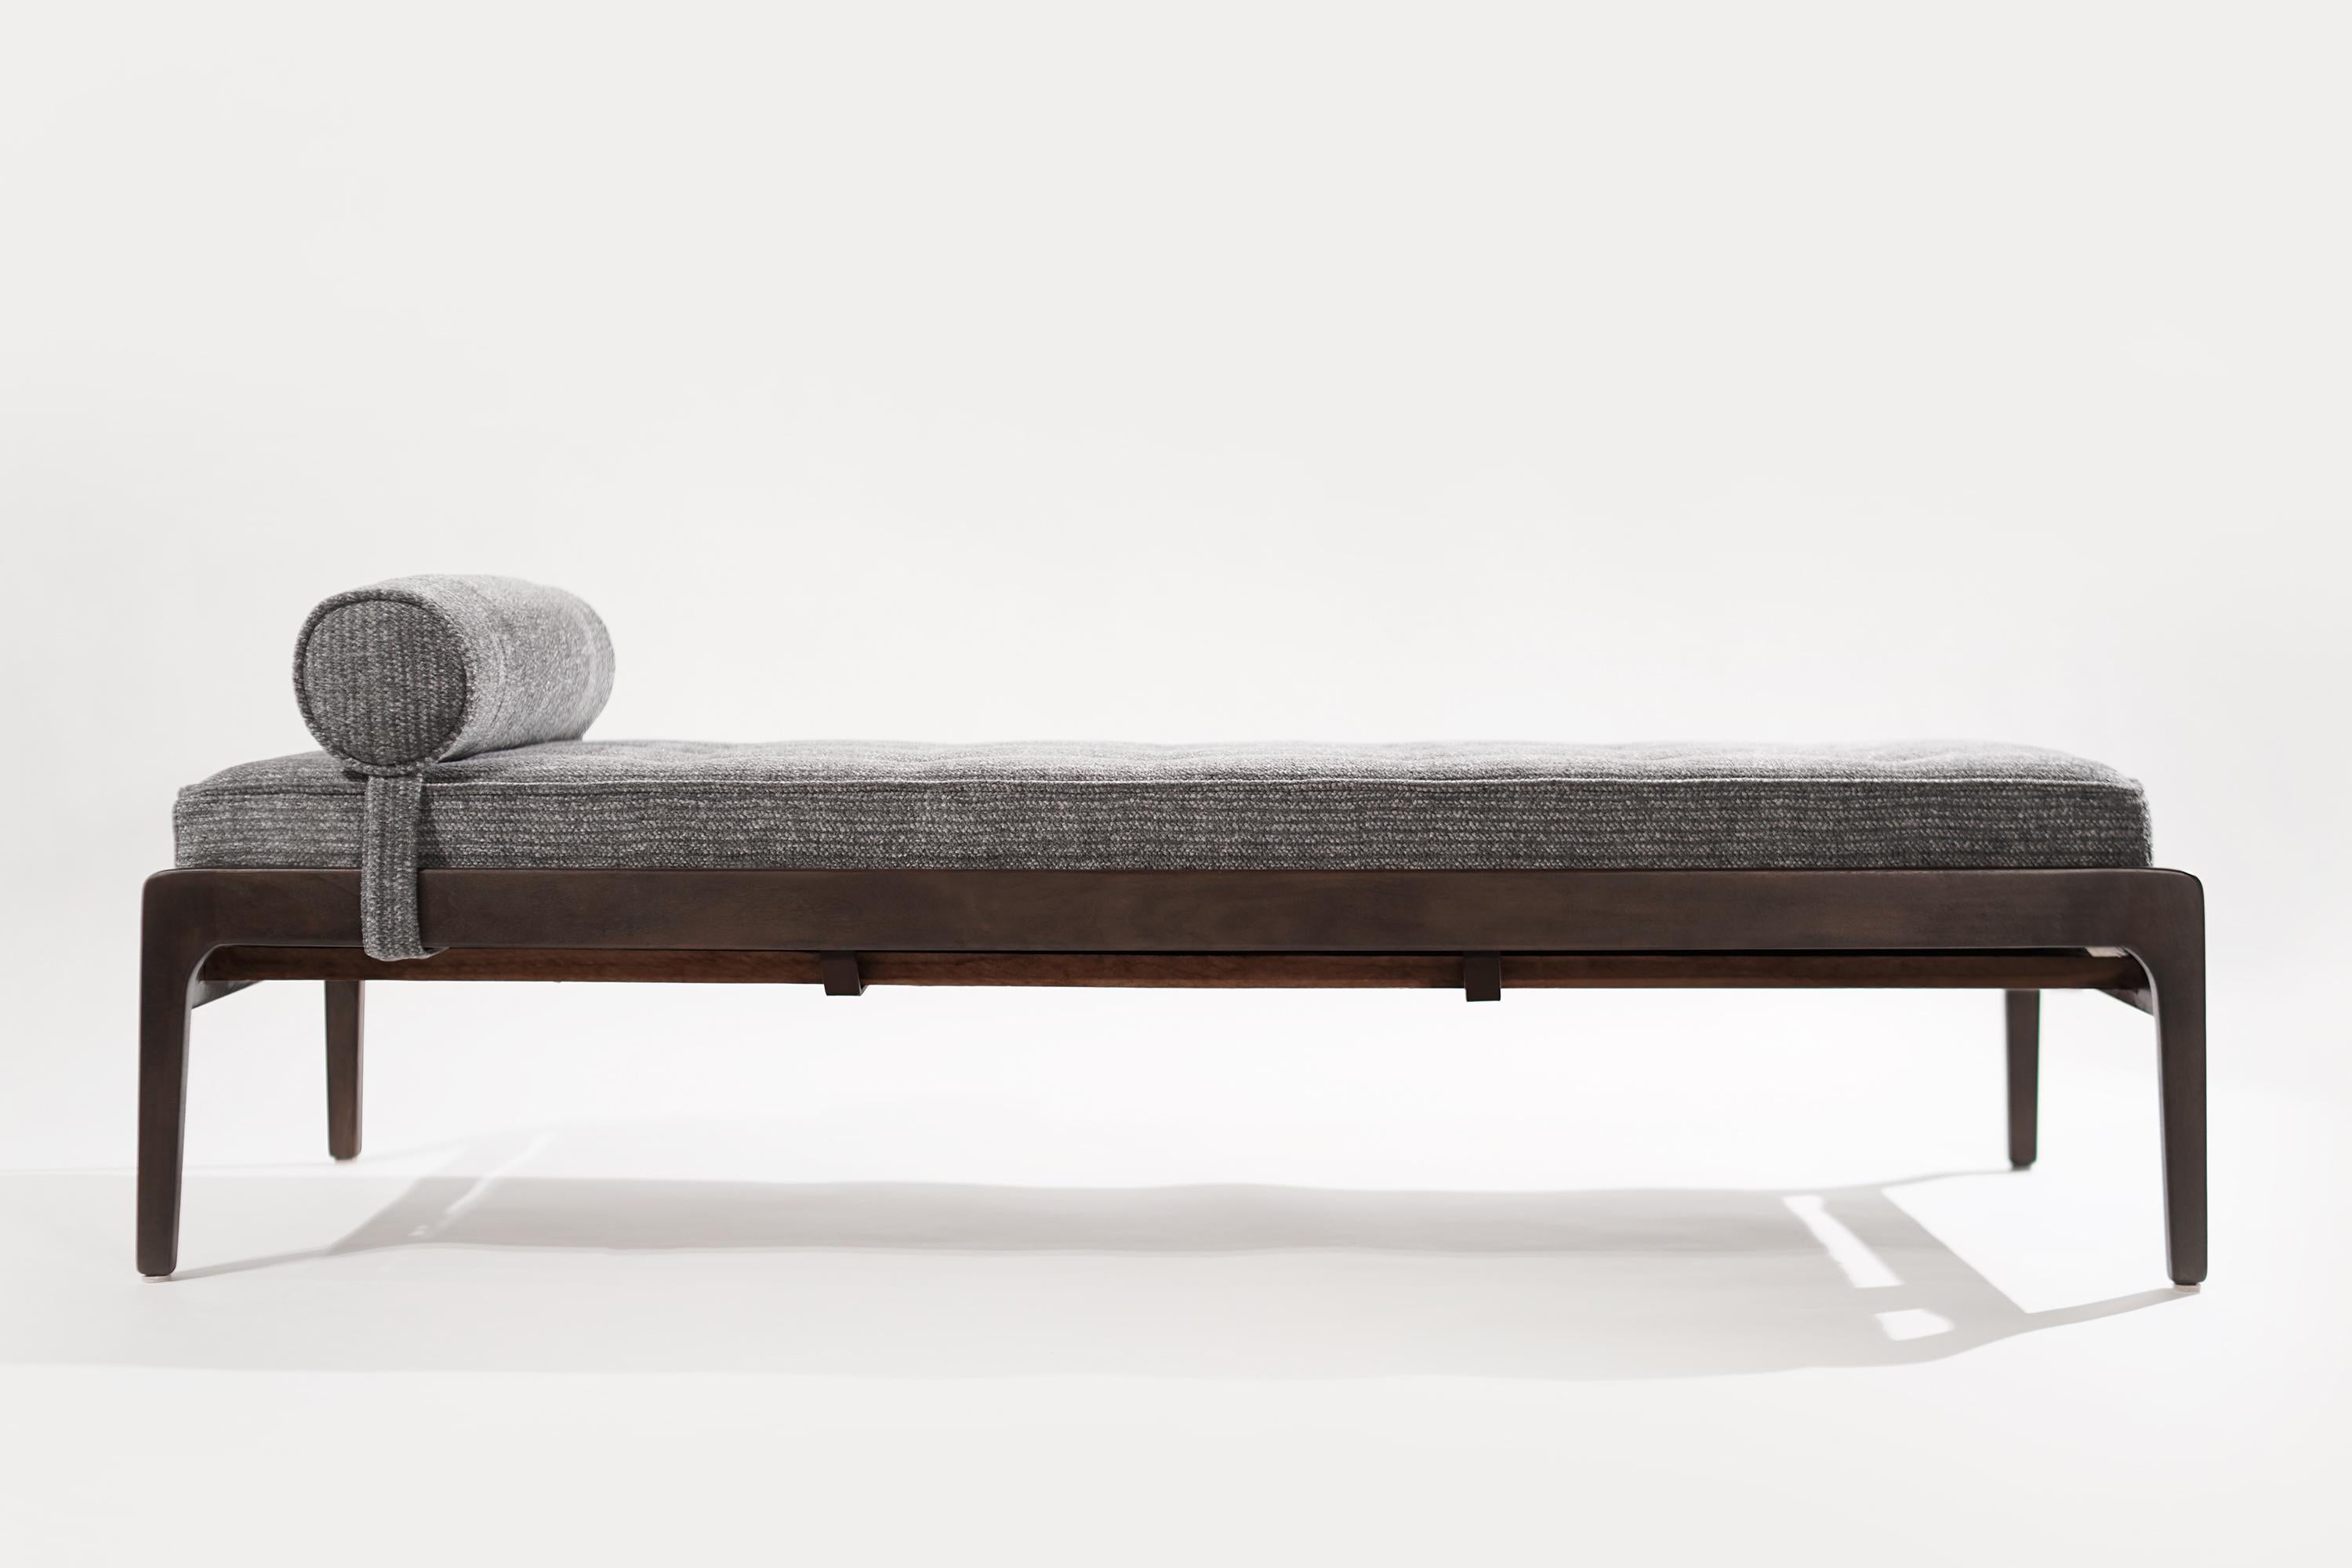 A stunning Scandinavian-Modern daybed or bench, Denmark, 1950-1959. Walnut frame completely restored, newly upholstered on grey twill with tufted details.

Other designers of the period include, Finn Juhl, Kaare Klint, Hans Wegner, Gio Ponti, and